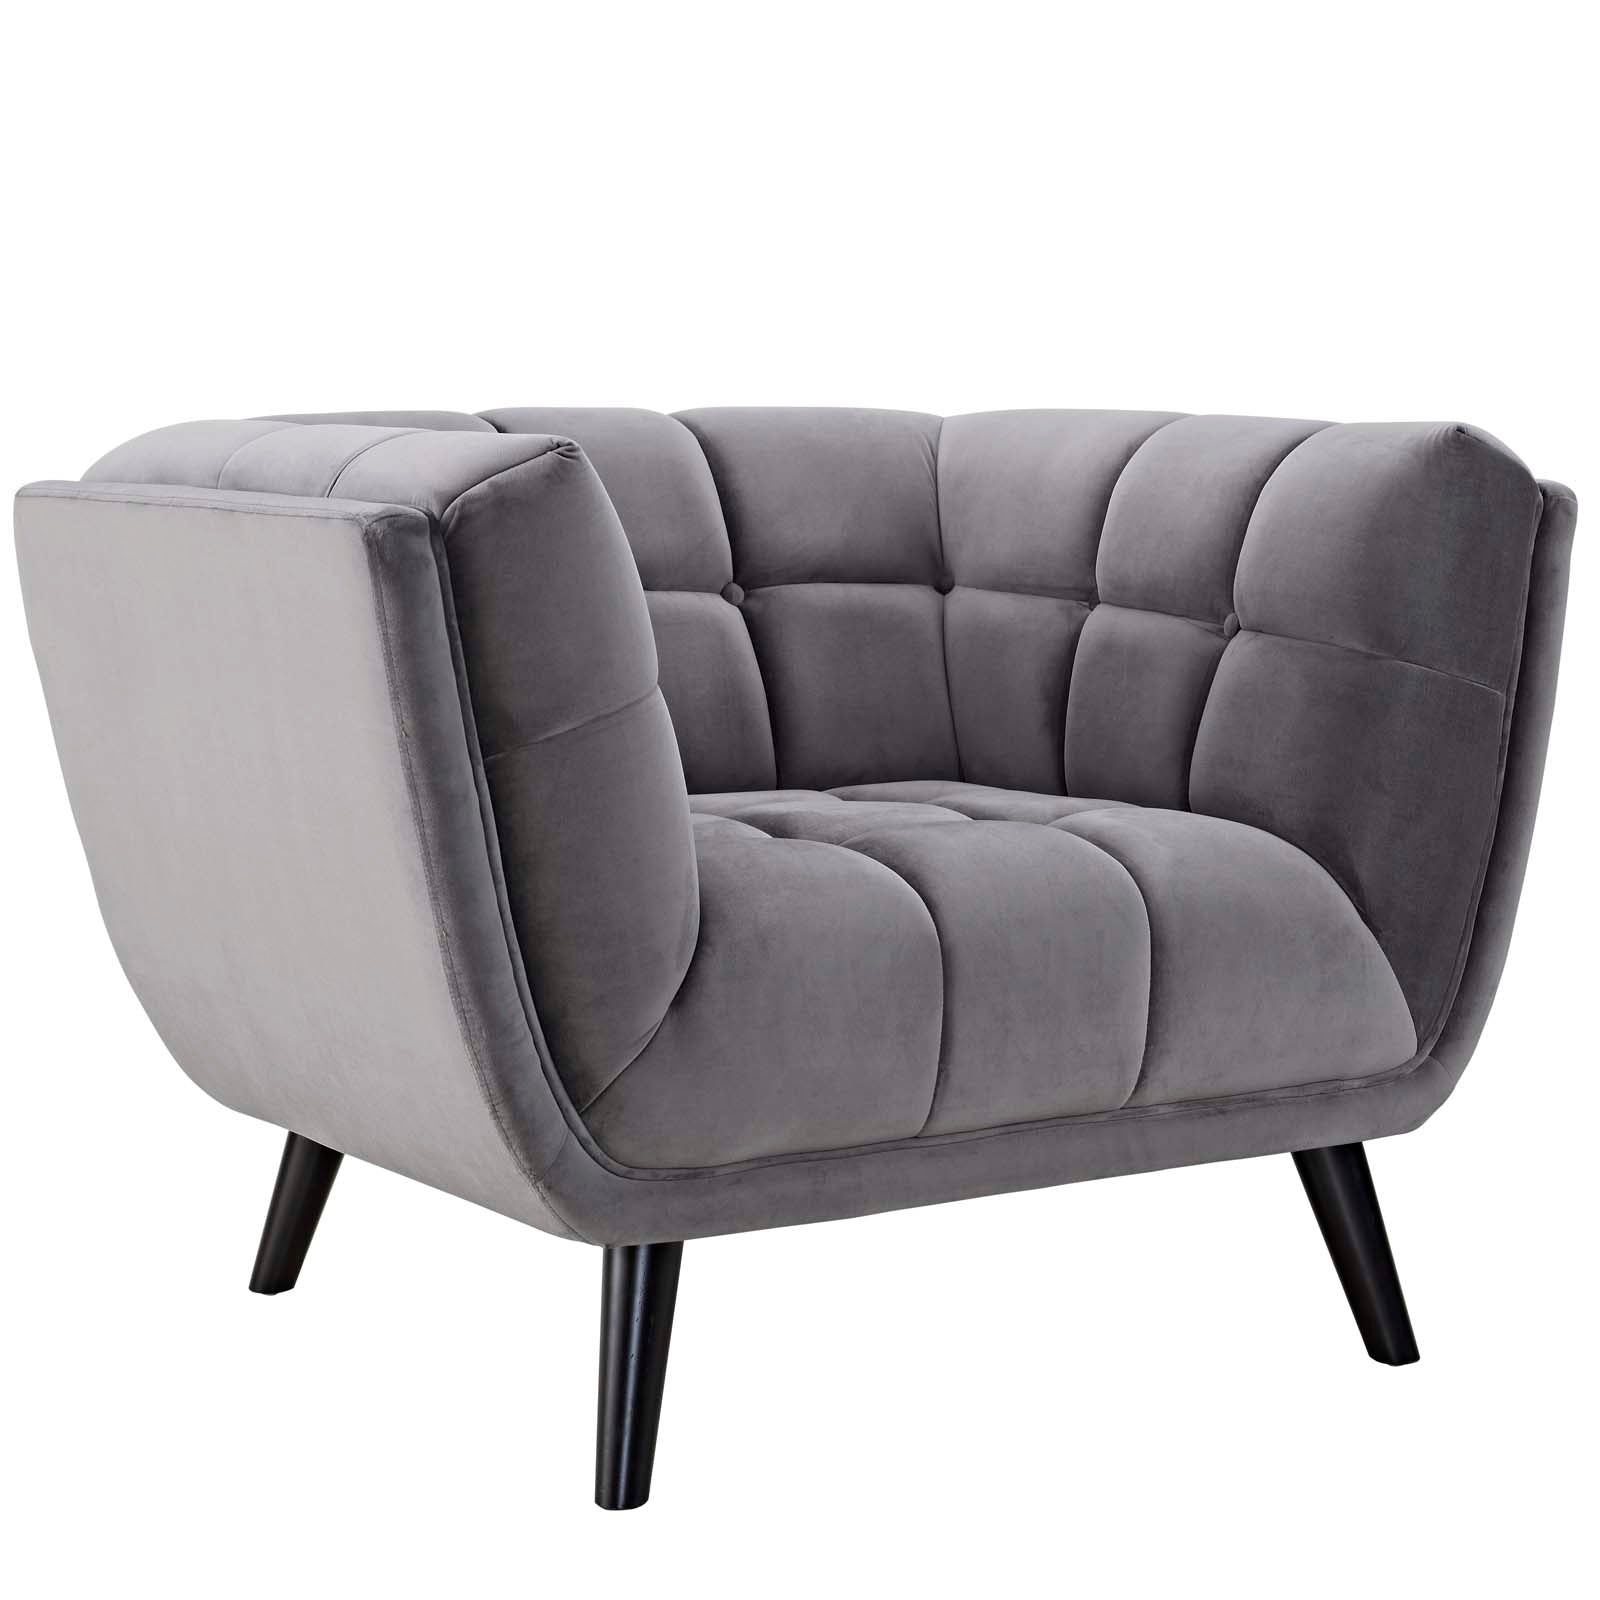 Modway Living Room Sets - Bestow 2 Piece Performance Velvet Sofa and Armchair Set Gray